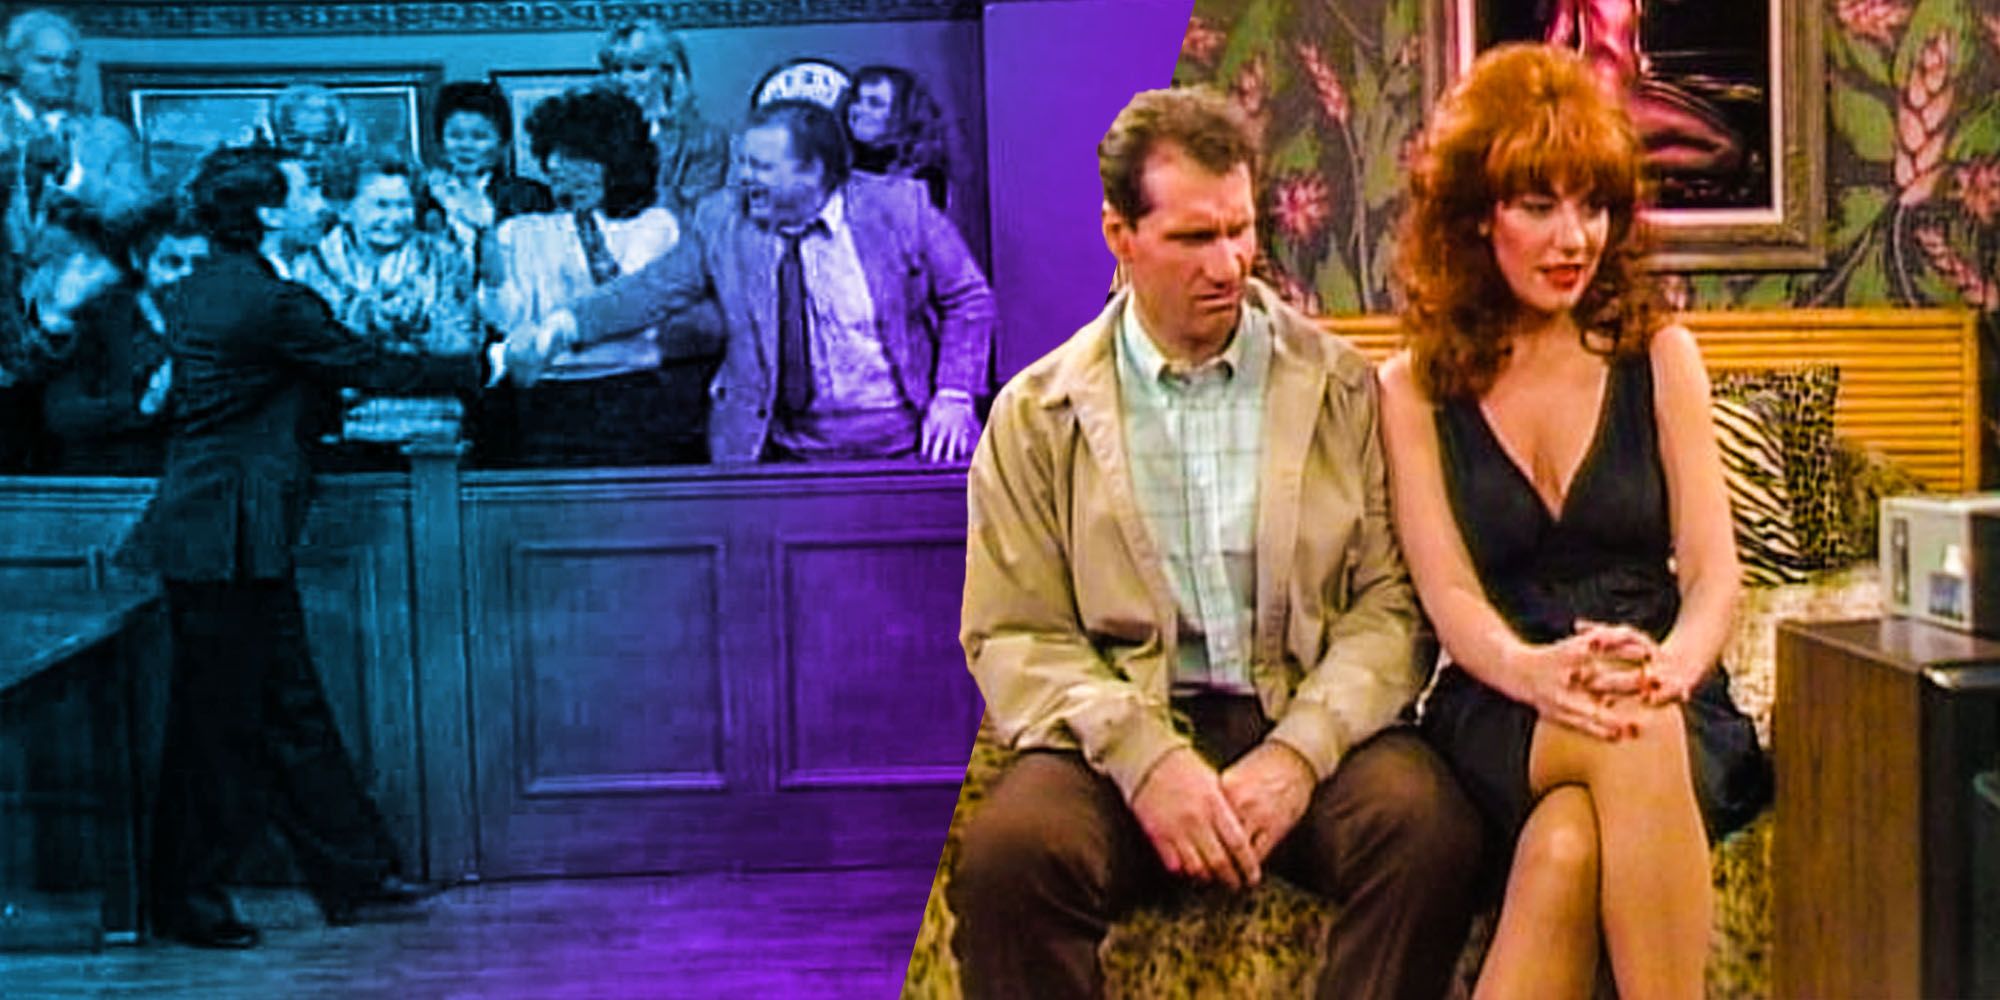 Blended image of the banned Married with children episode Ill see you in court